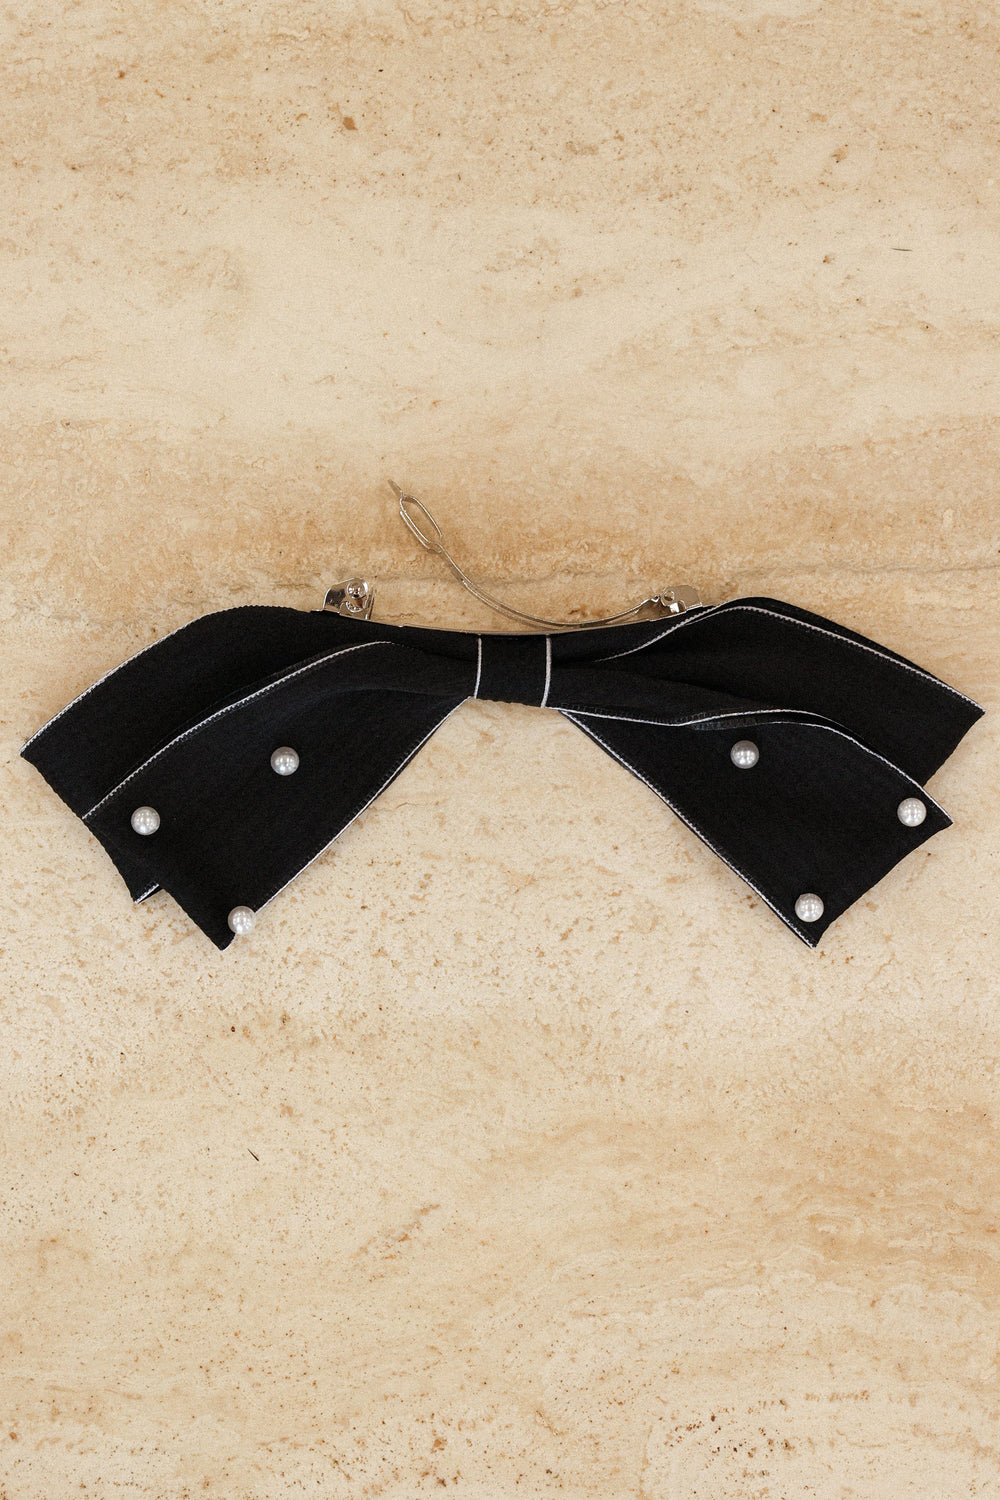 Petal and Pup USA ACCESSORIES Astor Bow Hair Clip - Black One Size